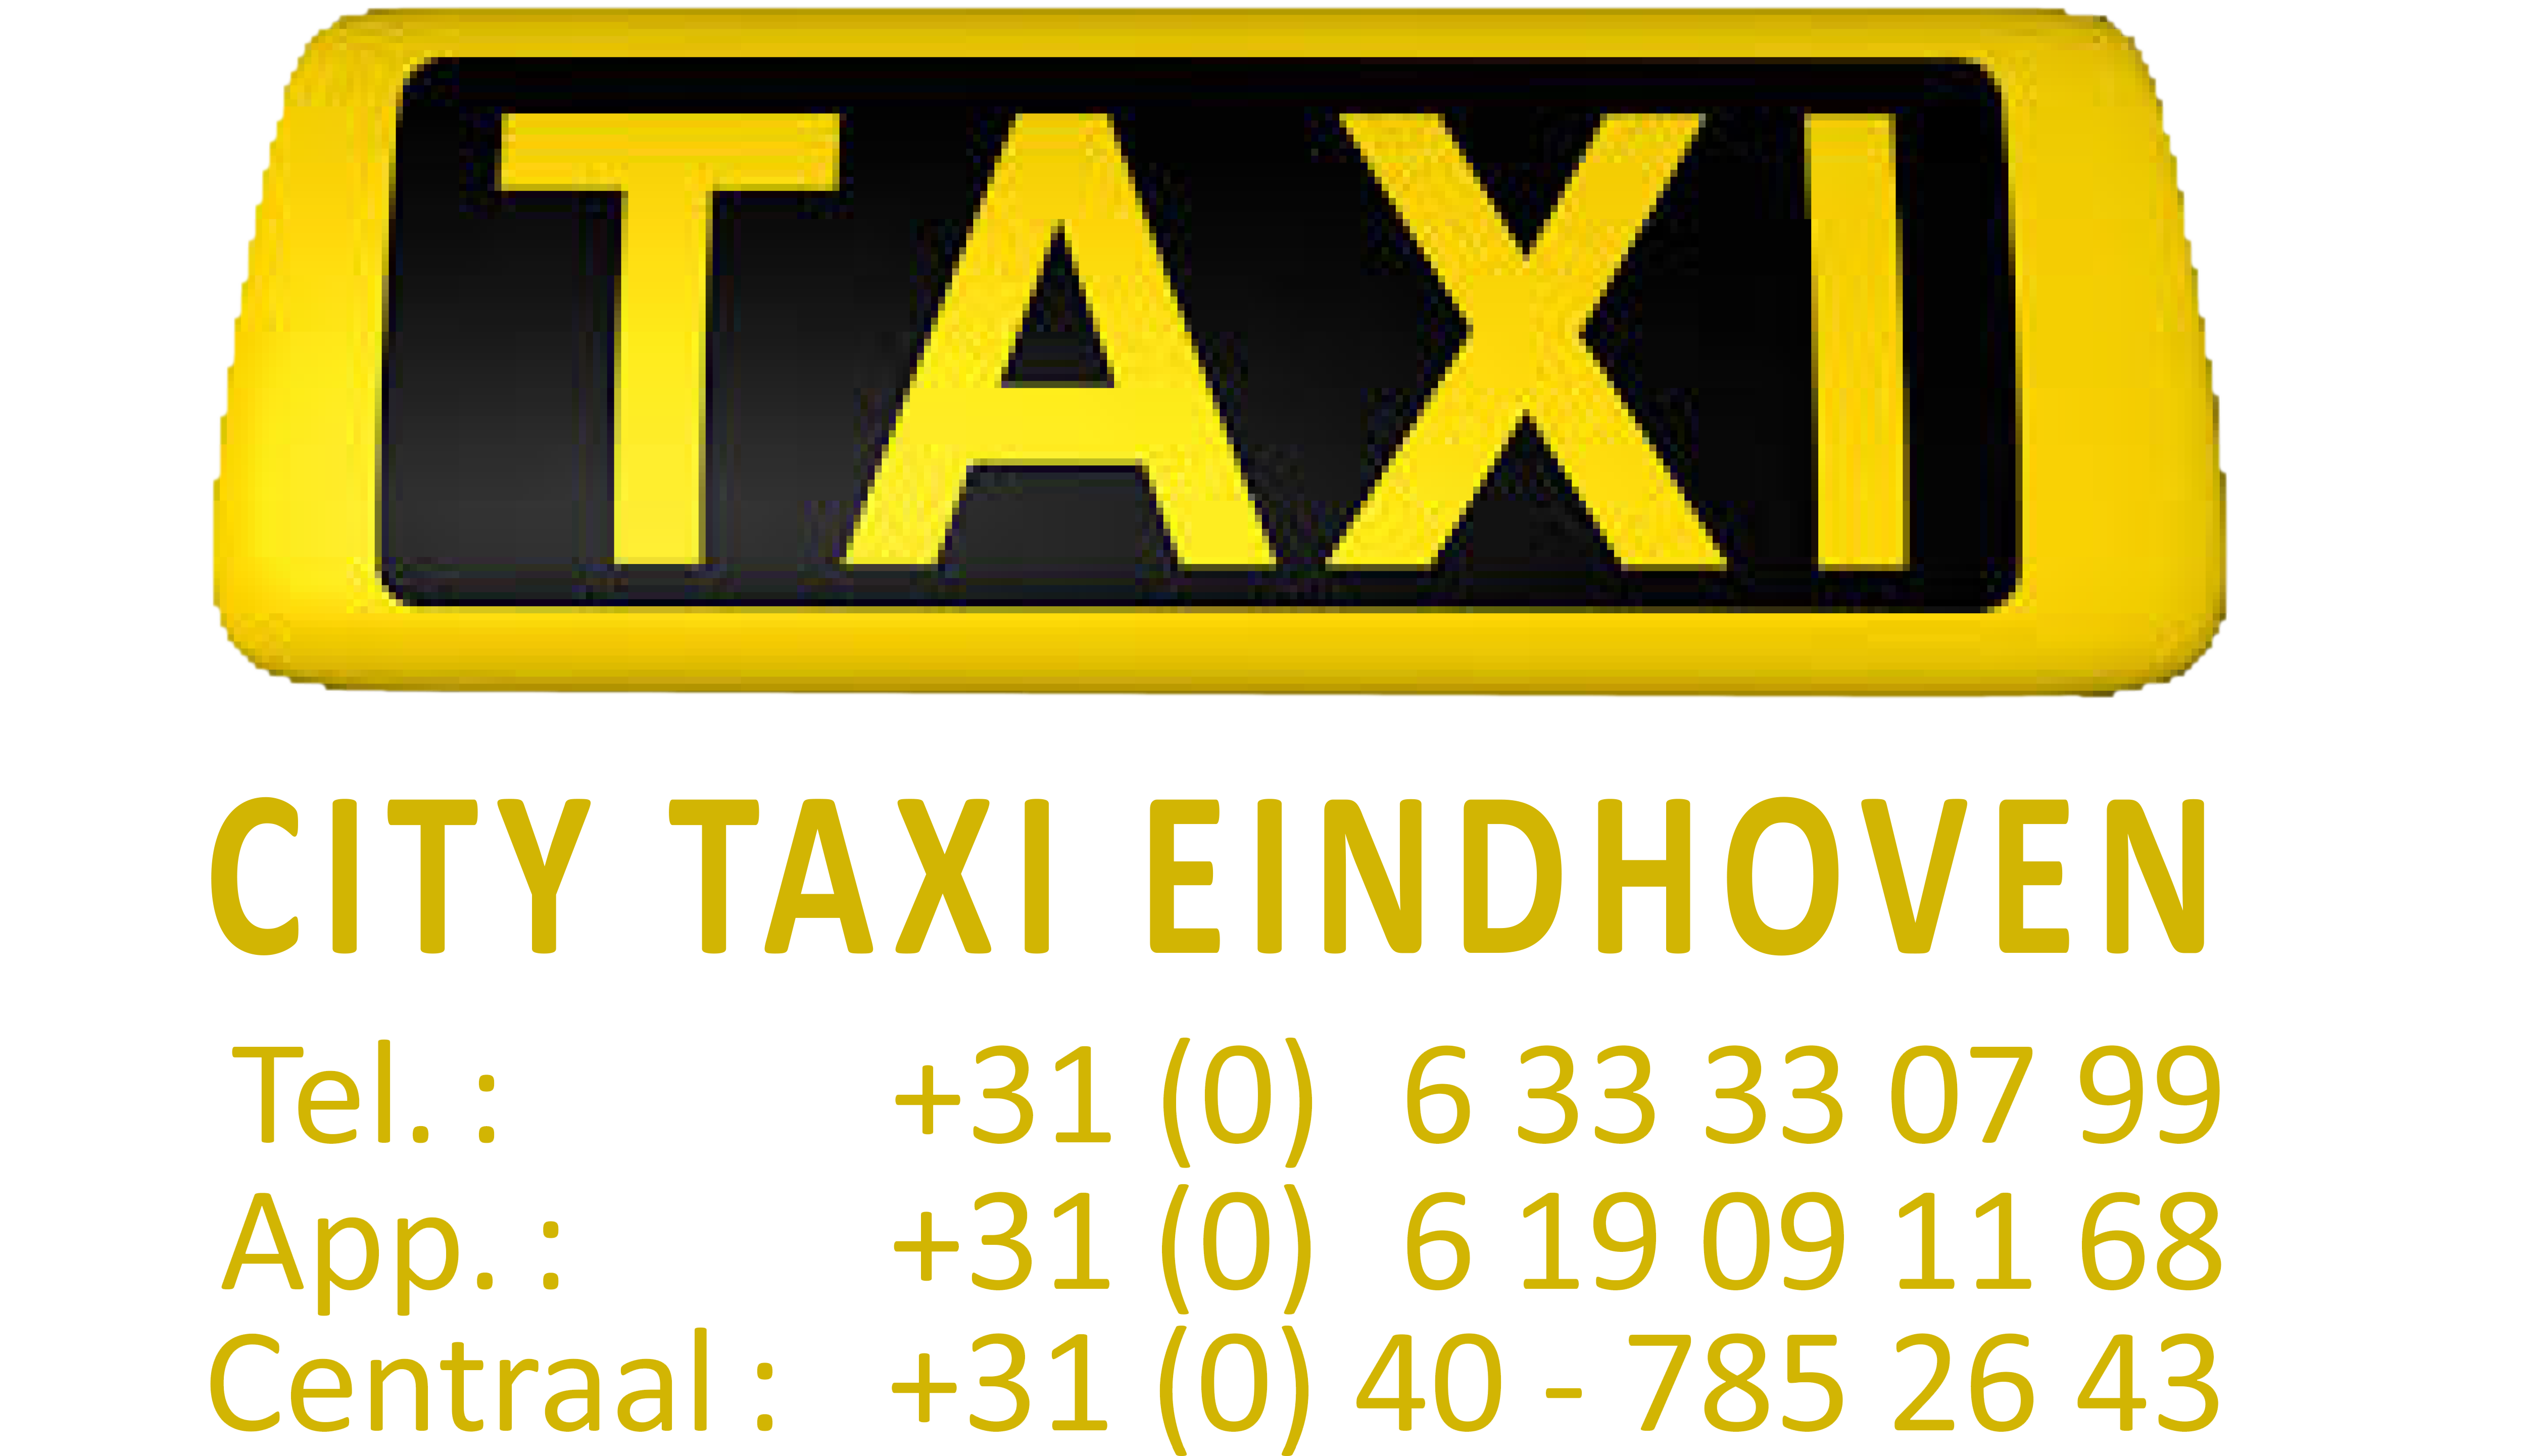 City Taxi Eindhoven